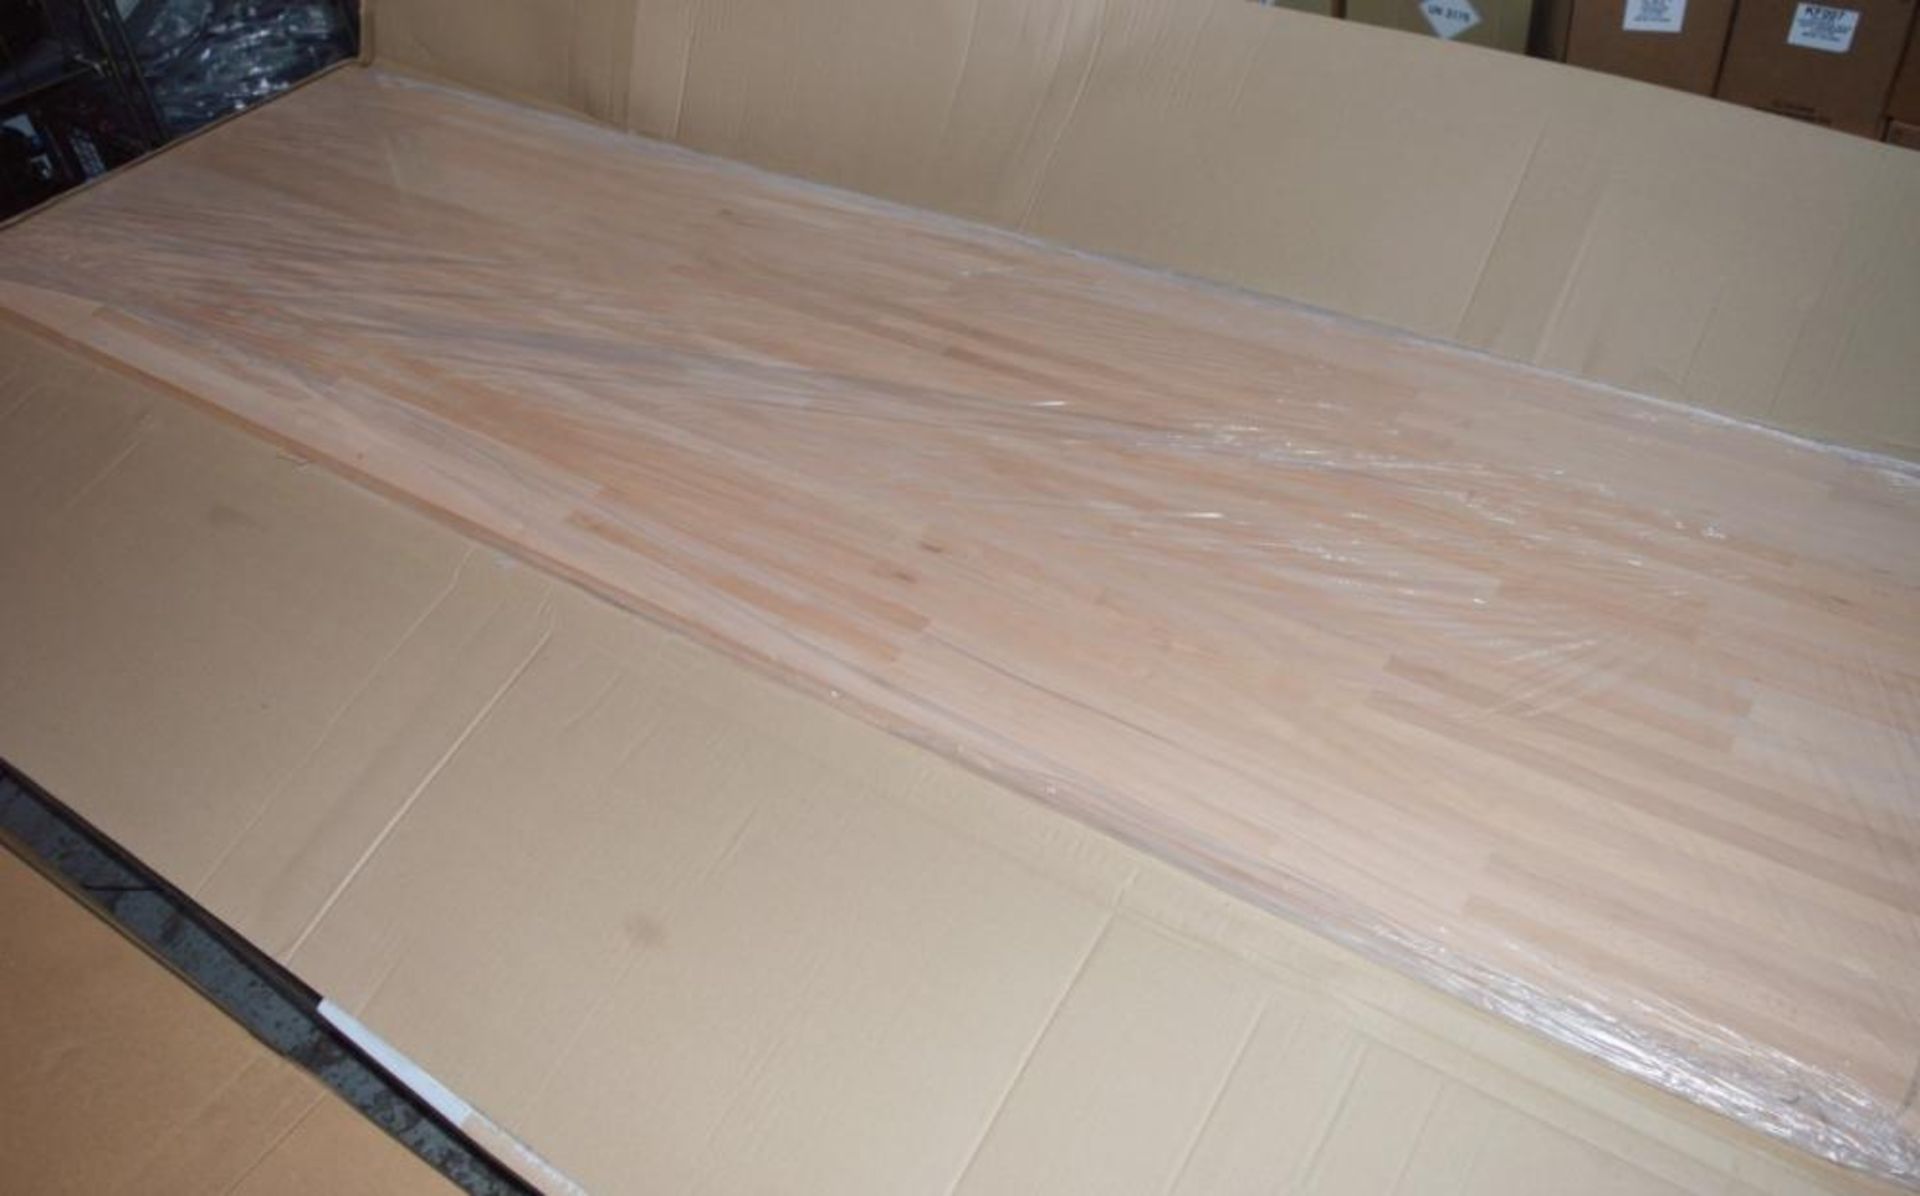 1 x Solid Wood Kitchen Worktop - PRIME BEECH - First Grade Finger Jointed Kitchen Worktop - Size: 30 - Image 3 of 5